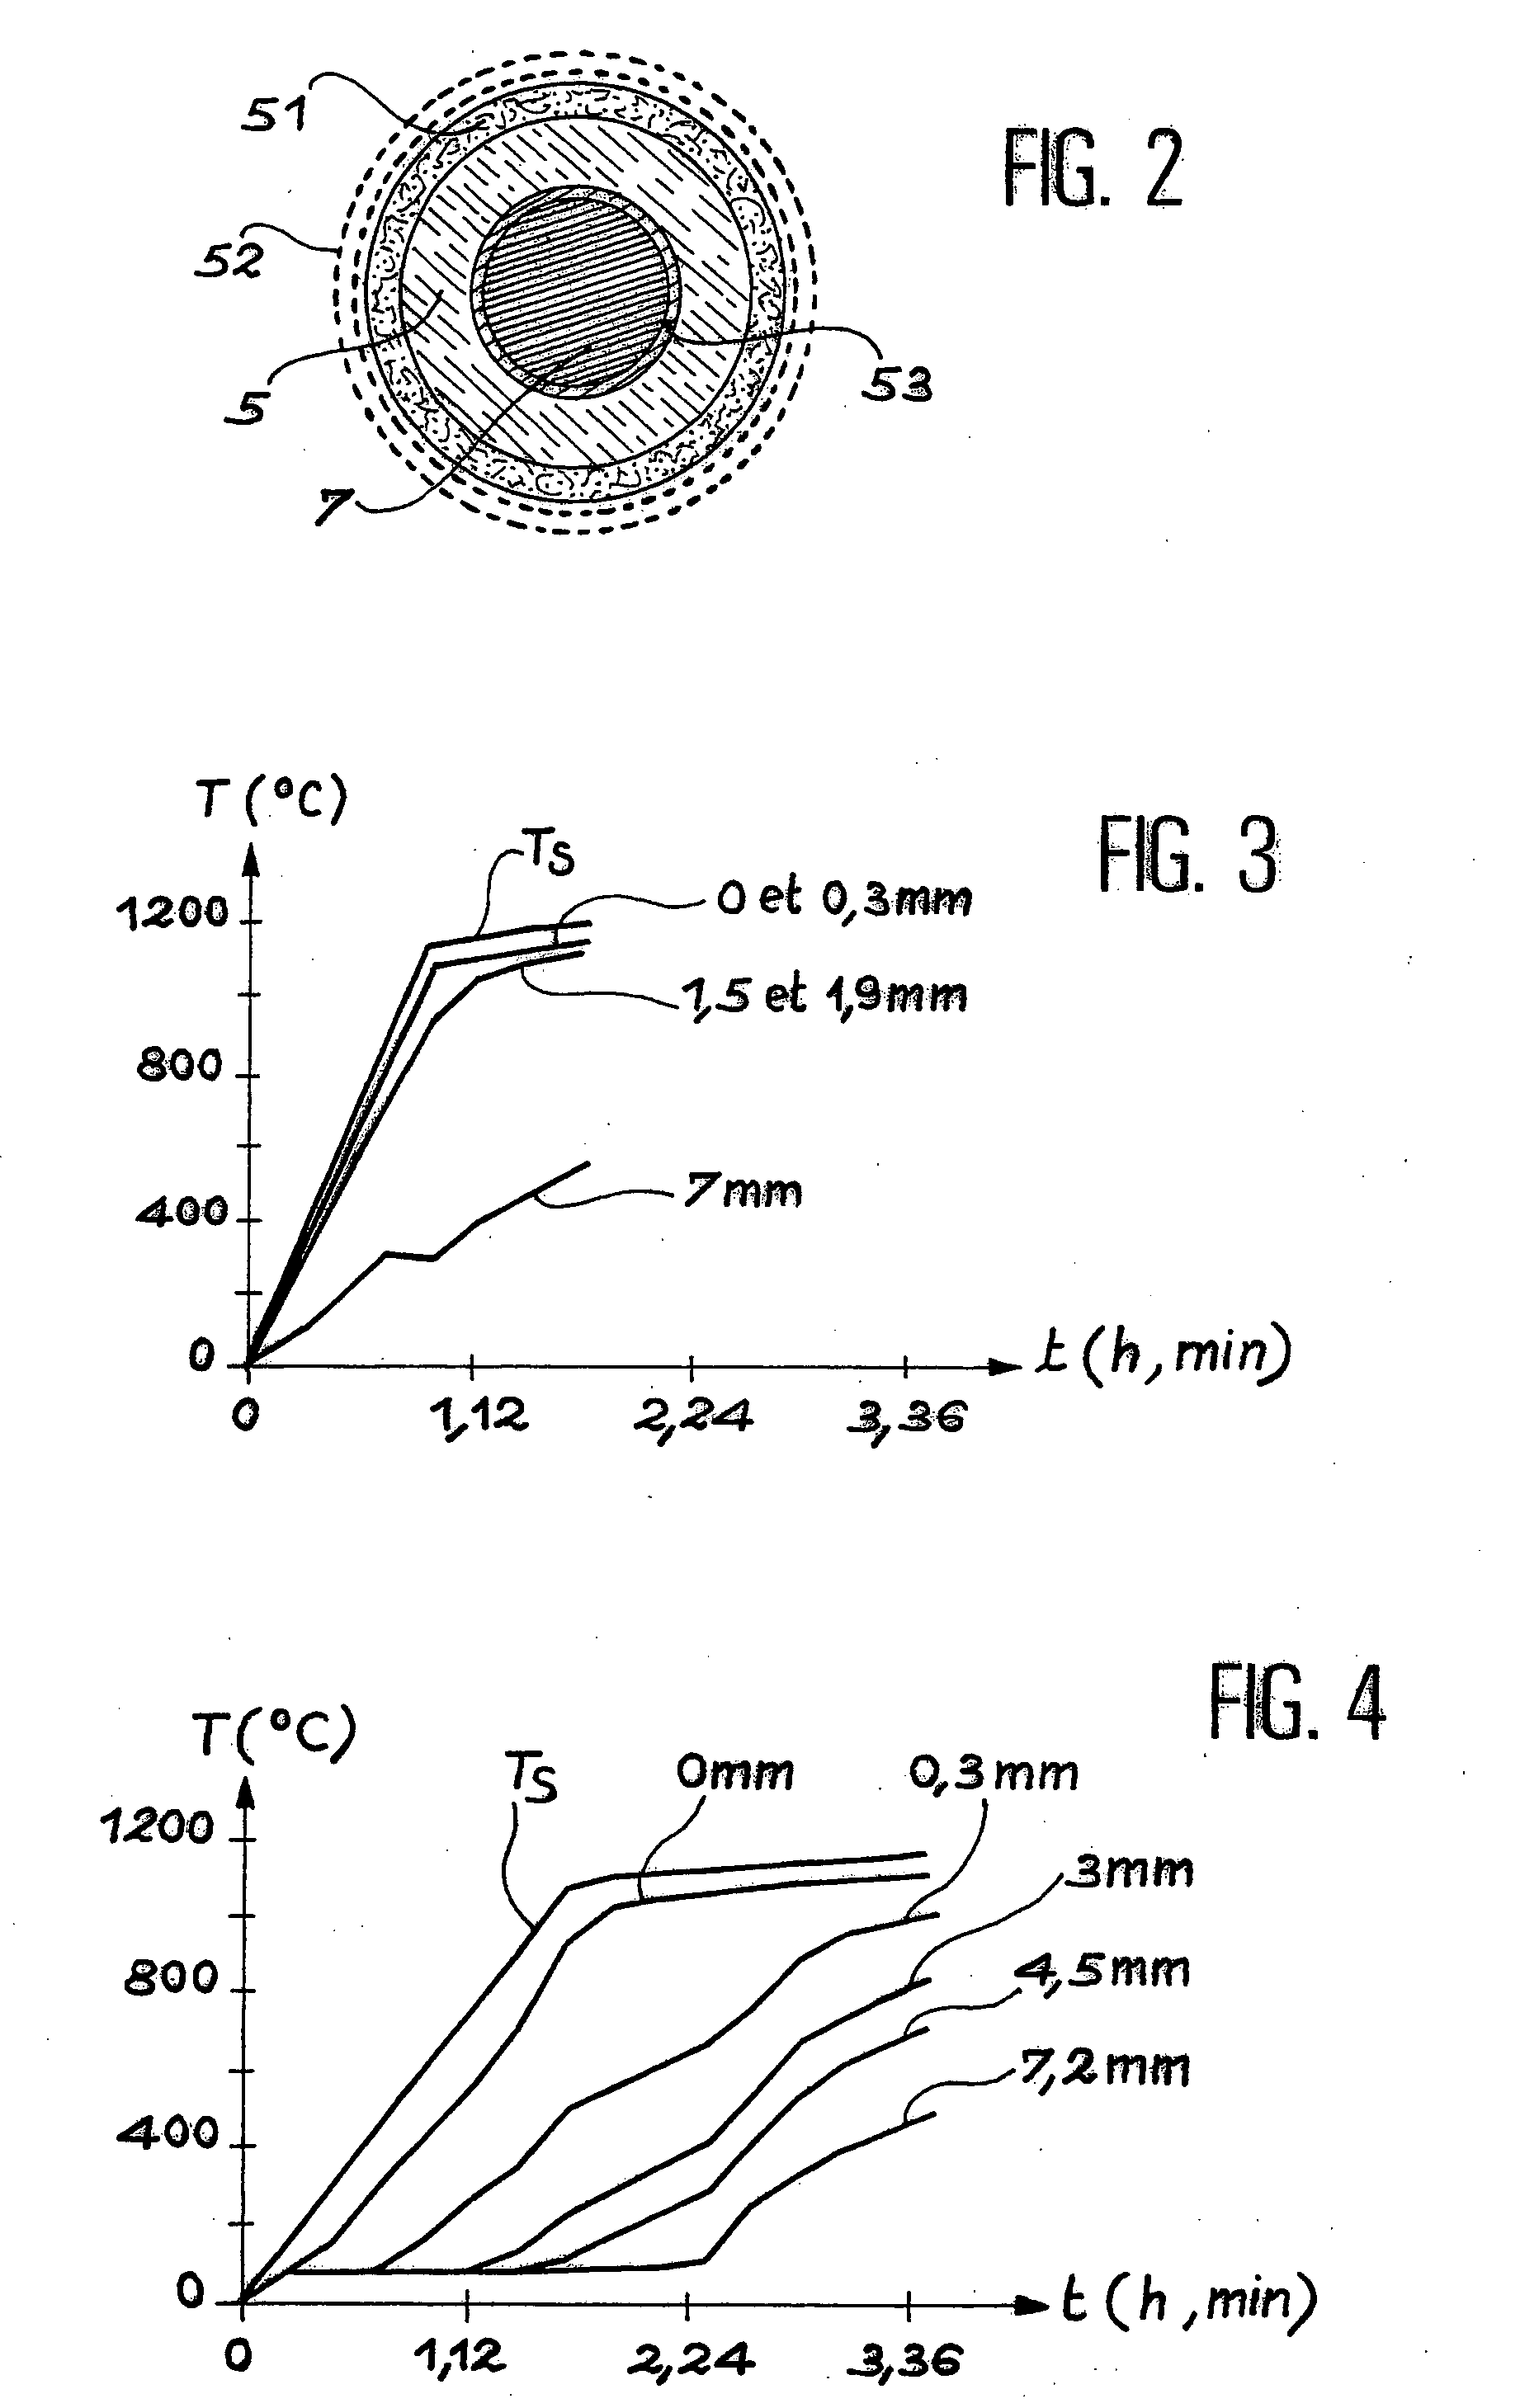 Methods for calefaction densifaction of a porous structure